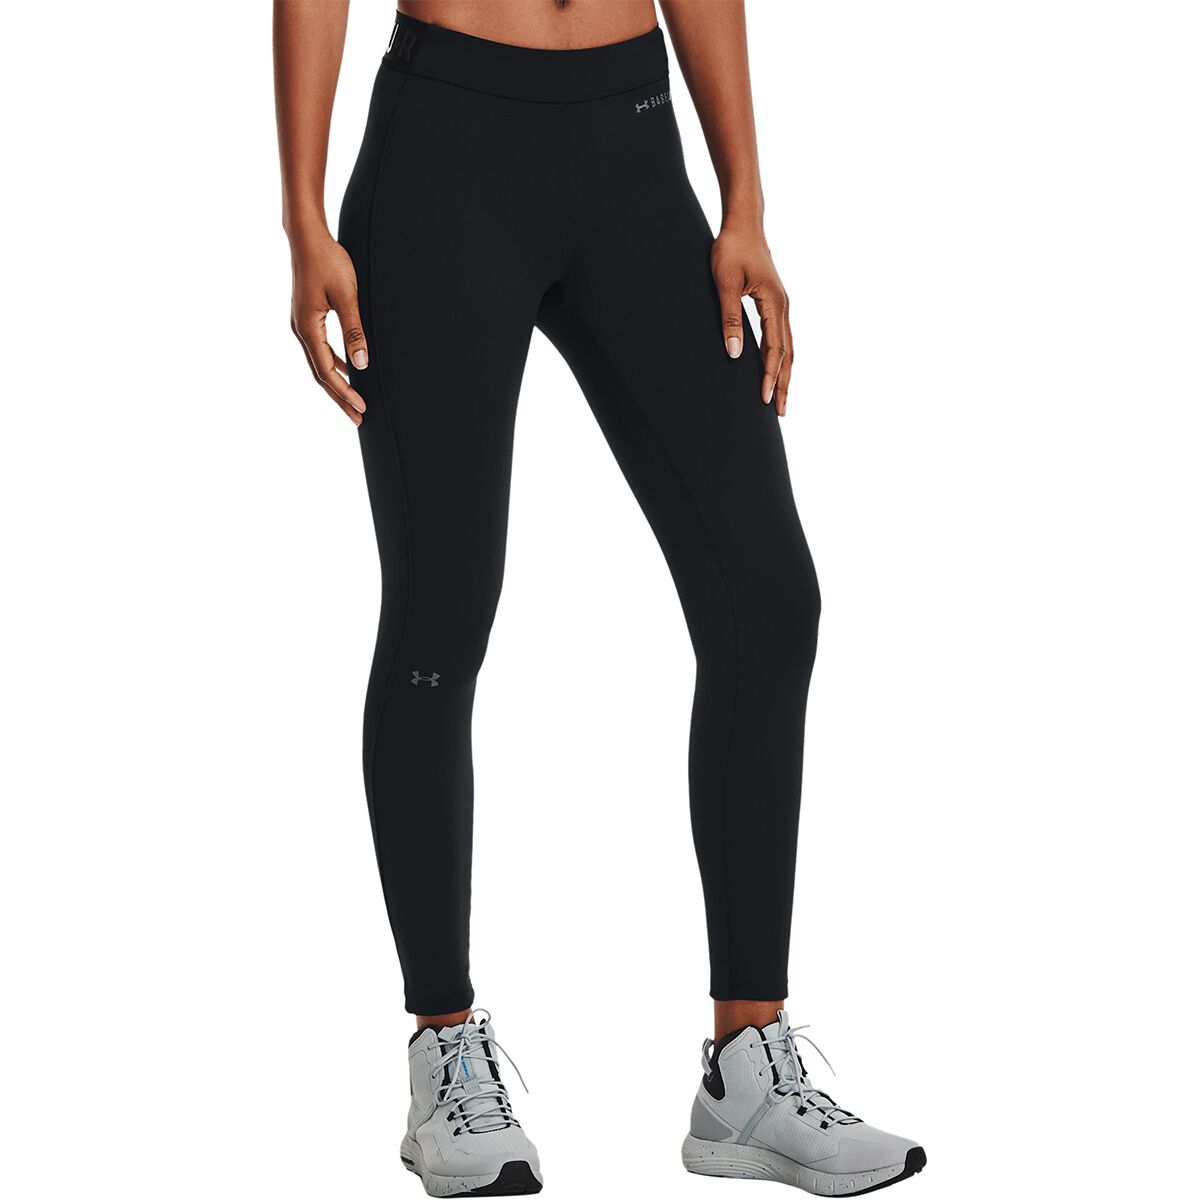 Under Armour Women's Motion Running Tights | Wiggle